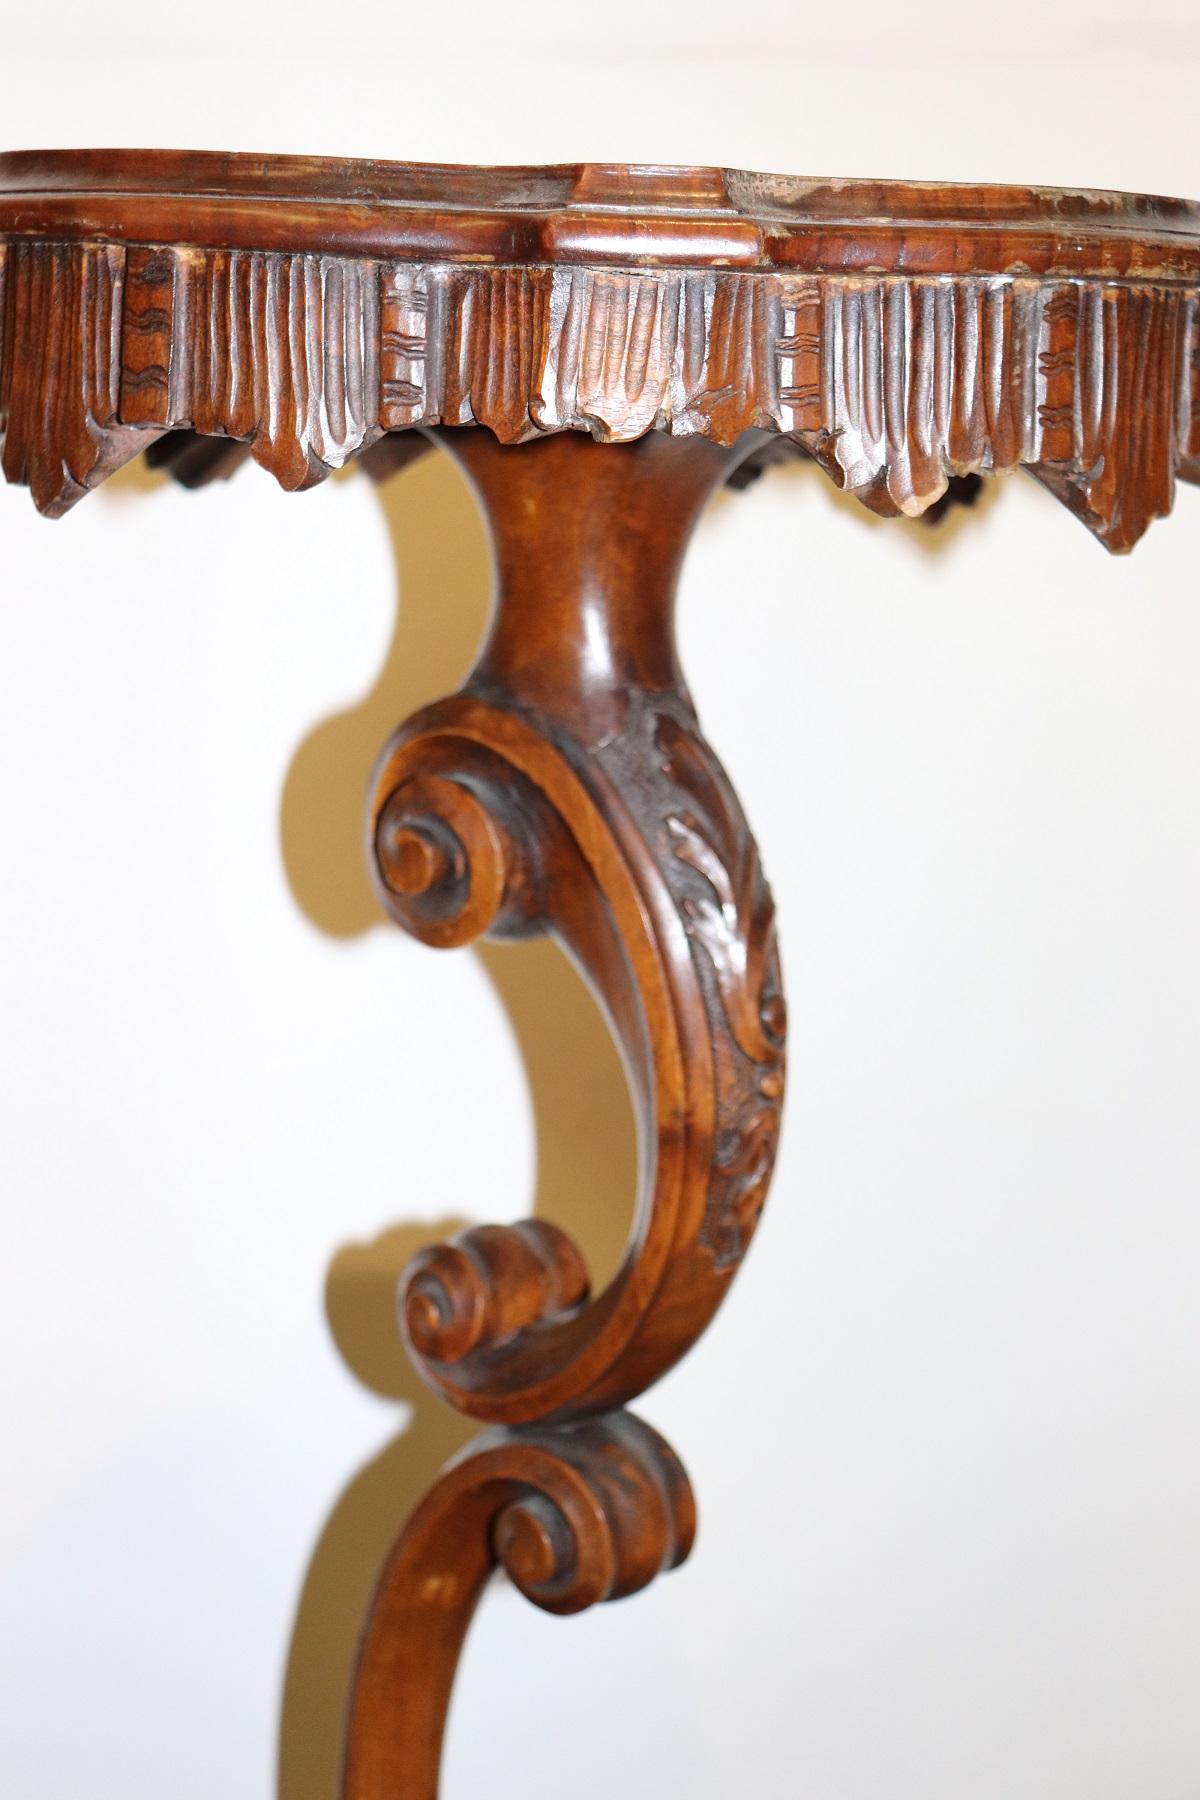 Rare and fine quality Italian gueridon table or pedestal table. The table presents a refined carving work in walnut wood. Look at the curls and the swirls of the stem. The plan has a nice skirt work. Really delicious table. True Italian antiques!